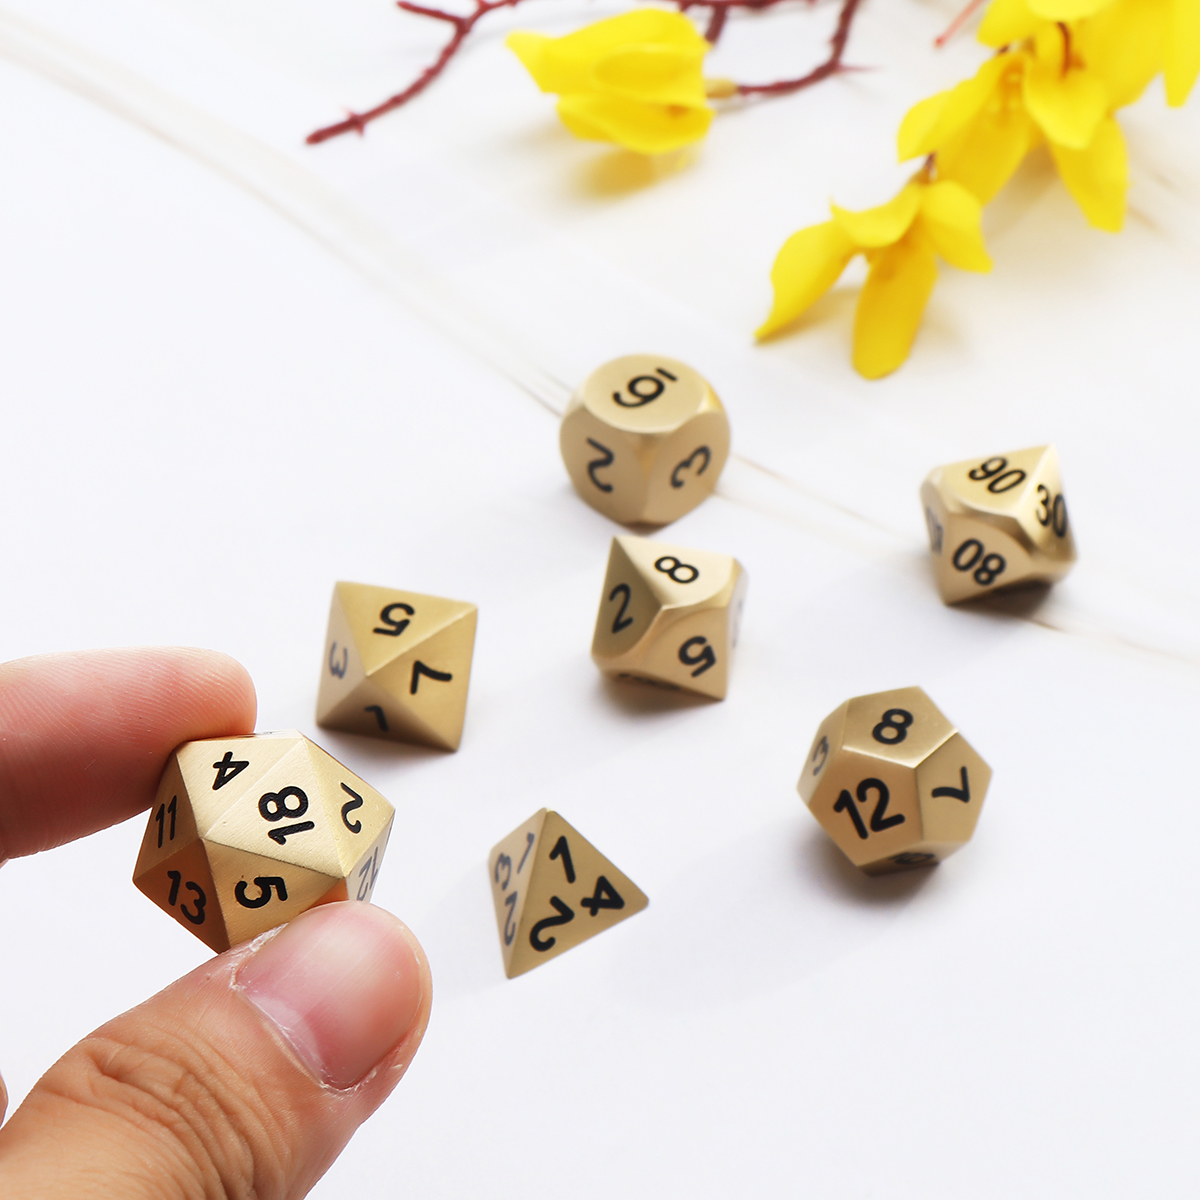 Pure-Copper-Polyhedral-Dices-Set-Metal-Role-Playing-Game-Dice-Gadget-for-Dungeons-Dragon-Games-Gift-1608120-5